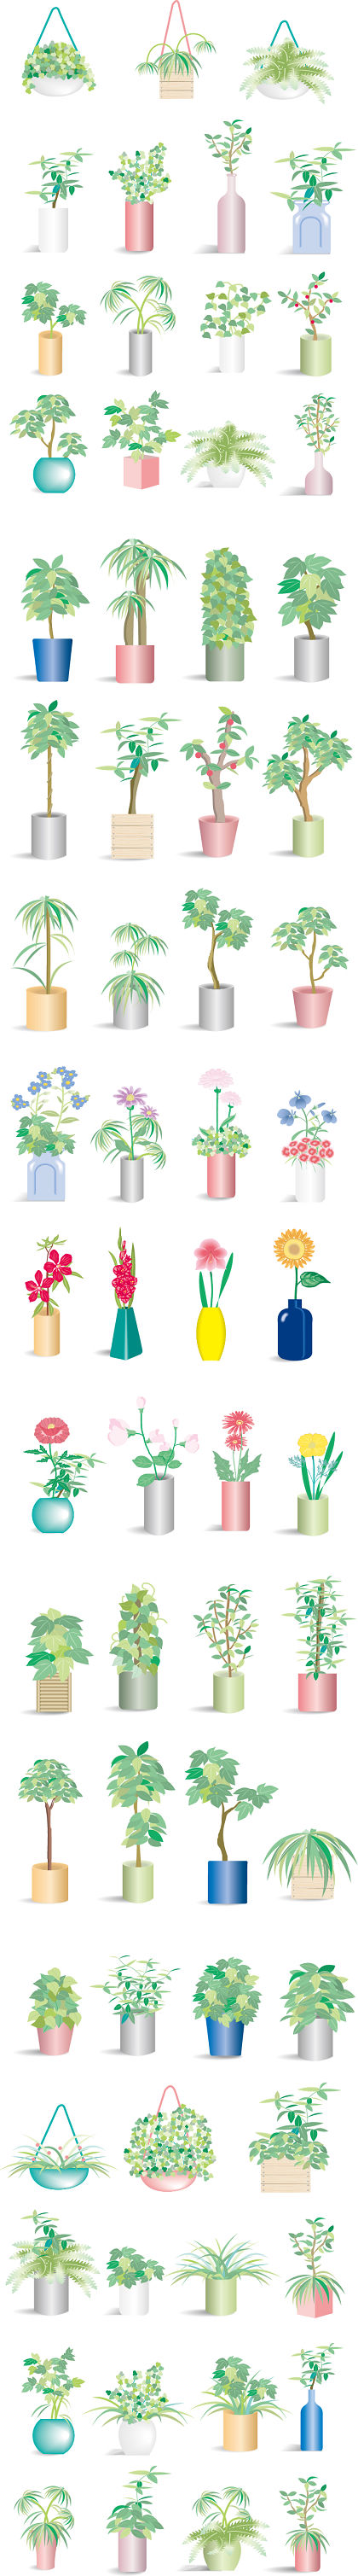 free vector 66 Potted Plants Vector